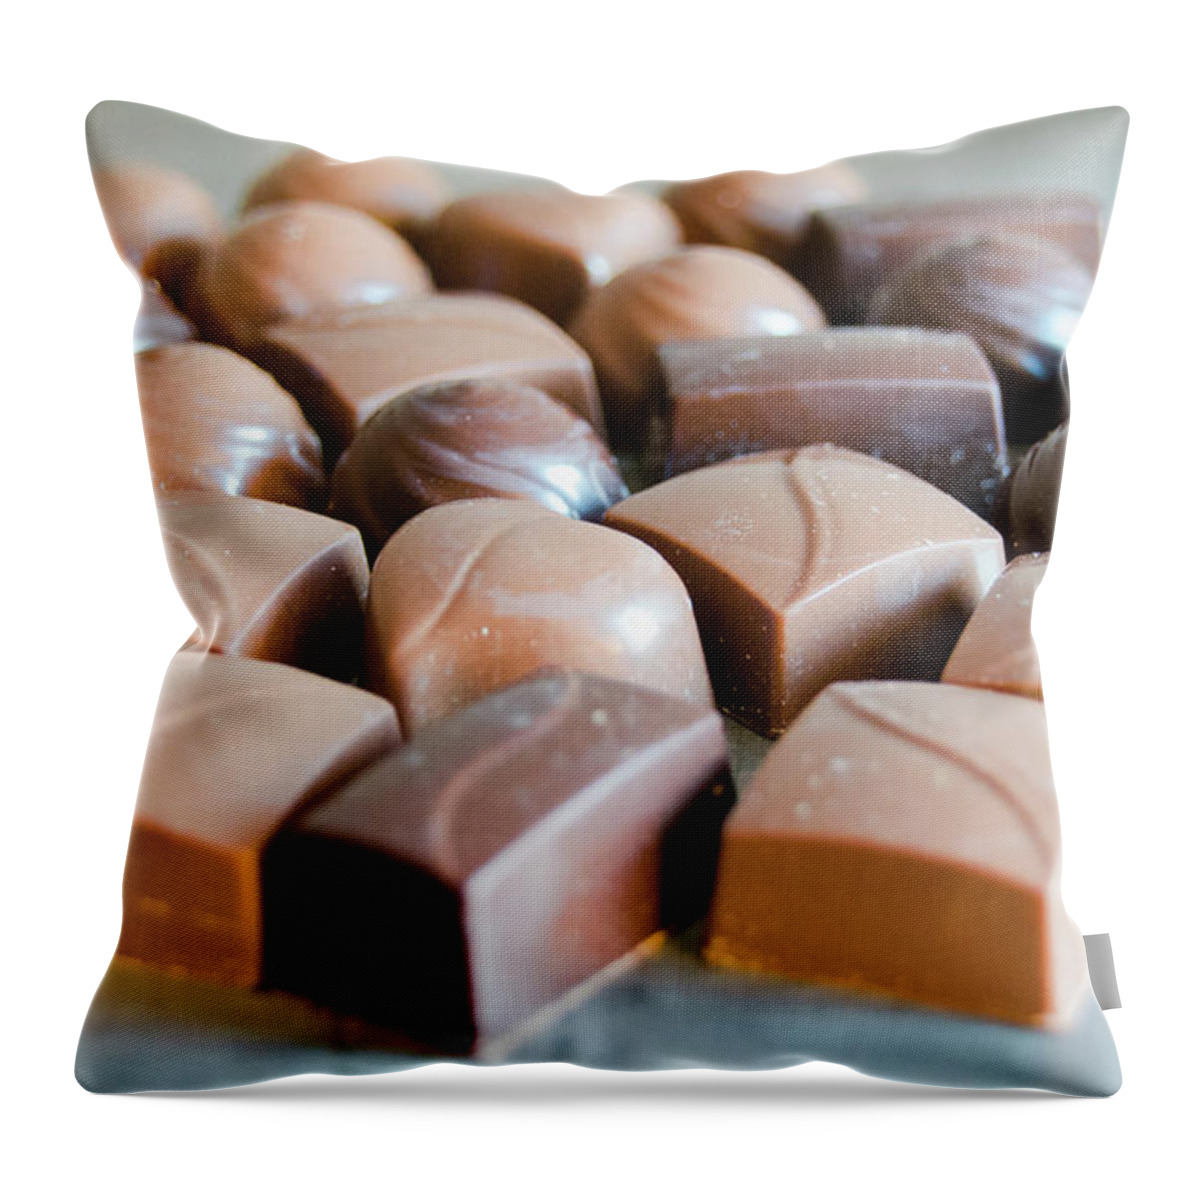 Variety Throw Pillow featuring the photograph Chocolate 6 by Andrea Anderegg